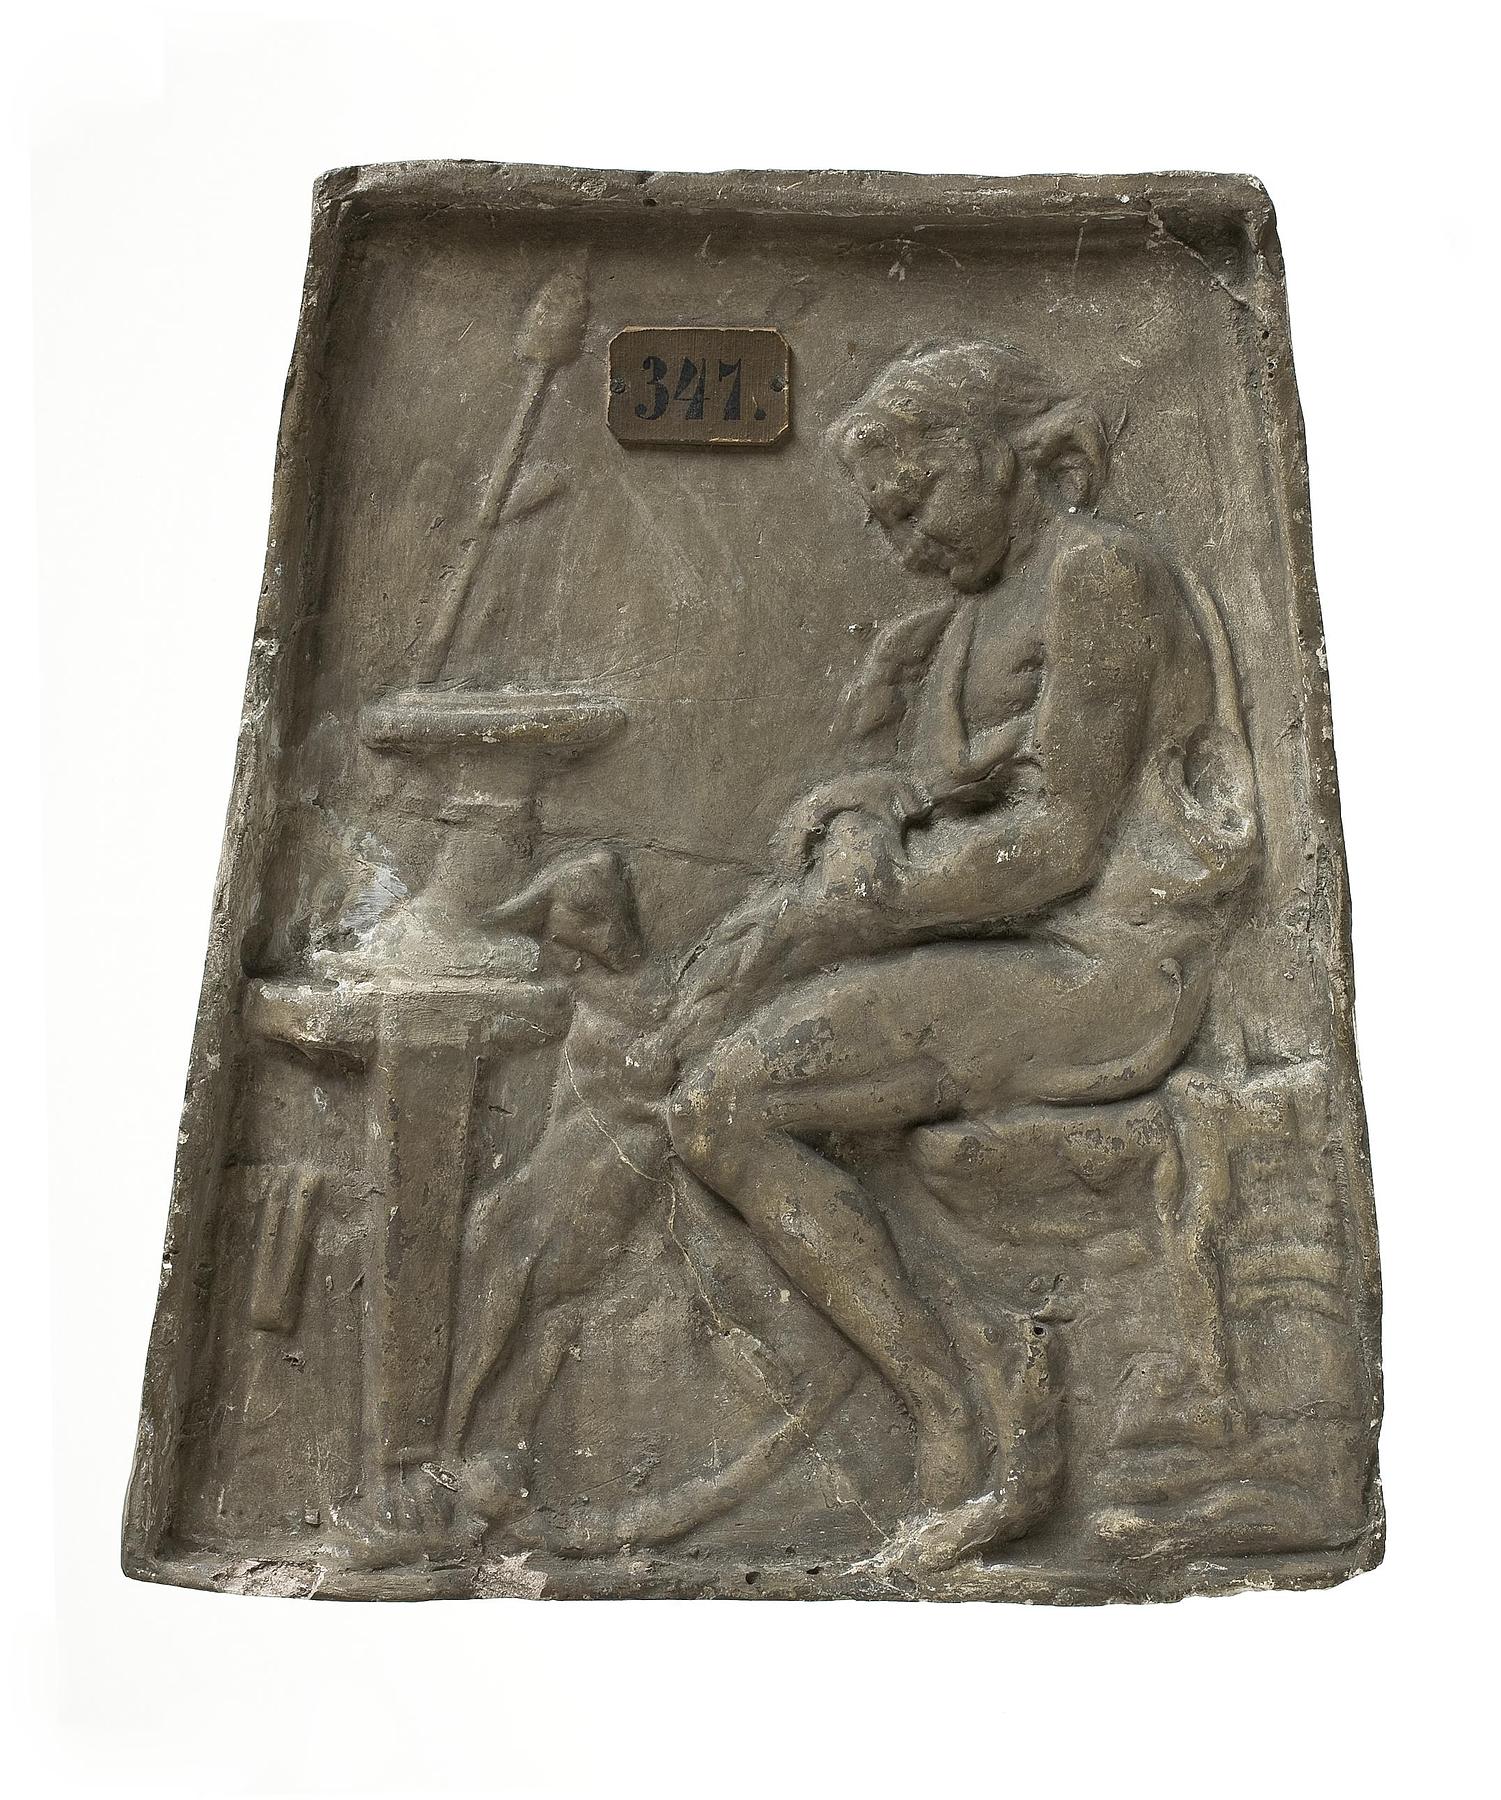 Seated satyr, L347